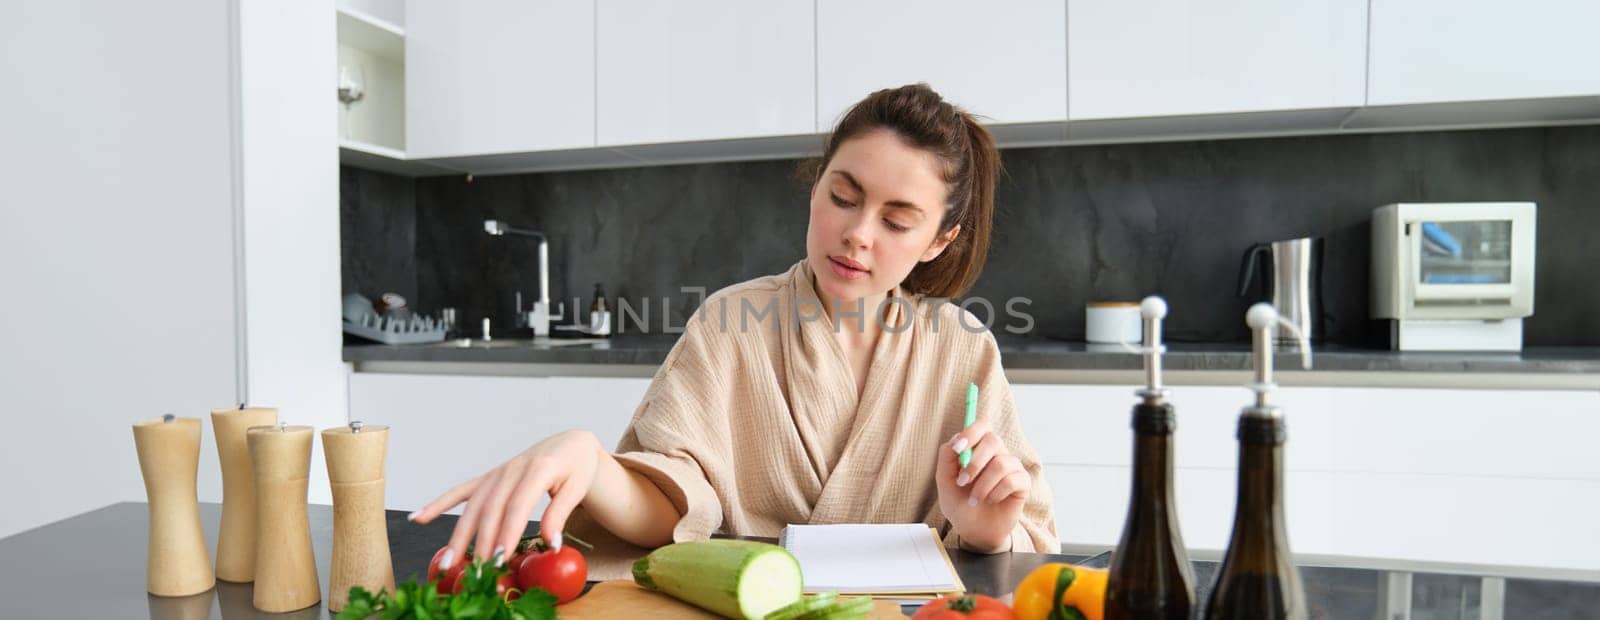 Portrait of woman cooking in the kitchen, sitting in front of vegetables, tomatoes zucchini and parsley, making list of groceries, writing down recipe, wearing bathrobe.